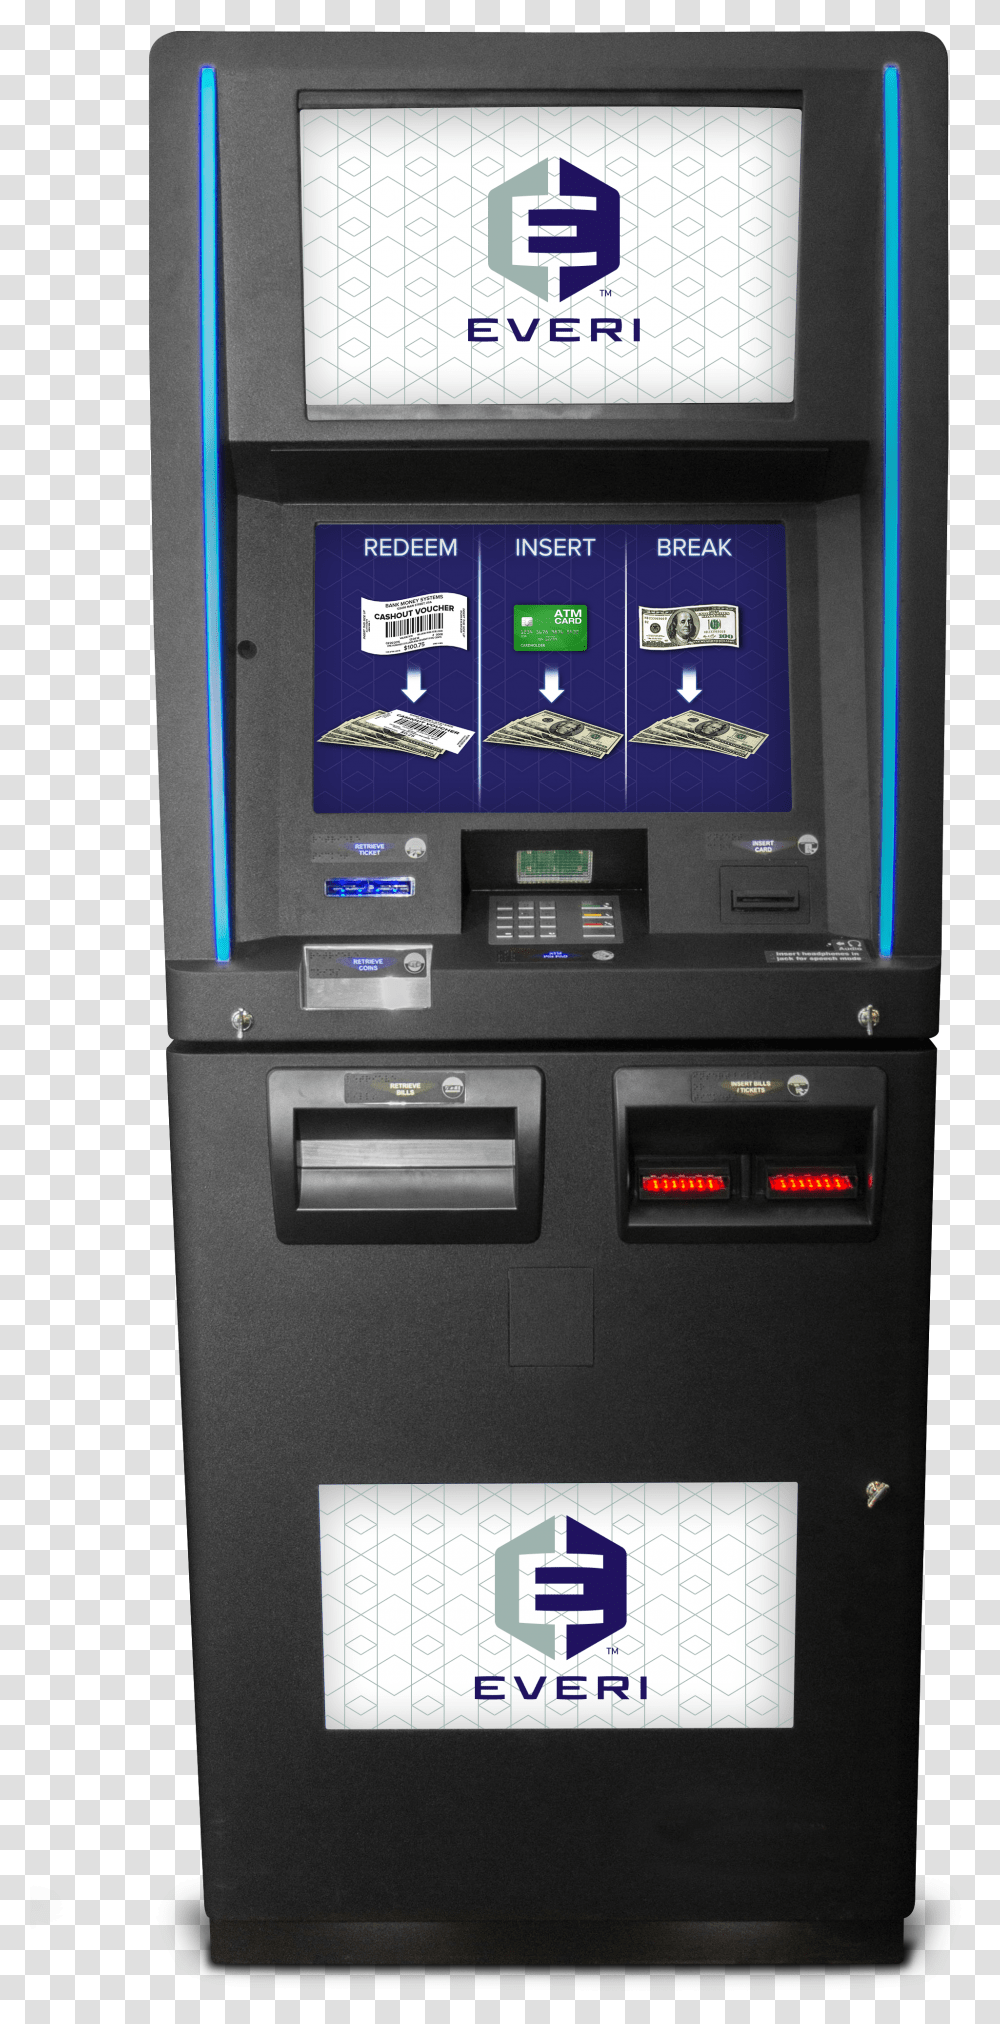 All In One Xchange Everi Games Ticket Redemption Machine Transparent Png